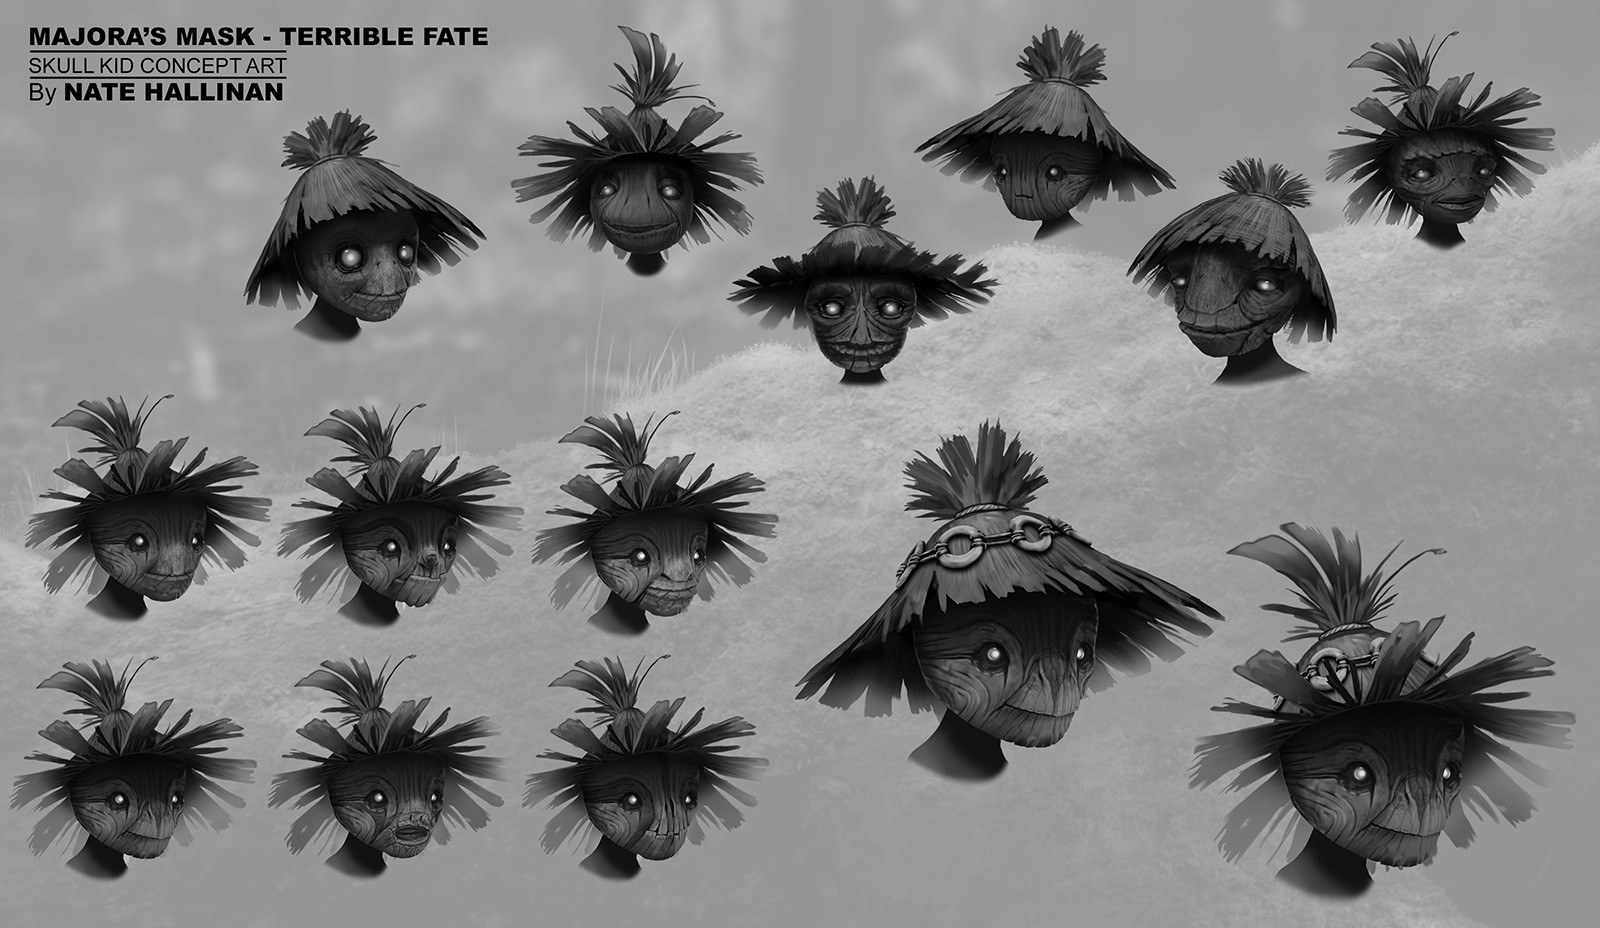 Skull Kid Face Rough designs. We wanted to make something that was kind of cute but played with making him a little creepy too/